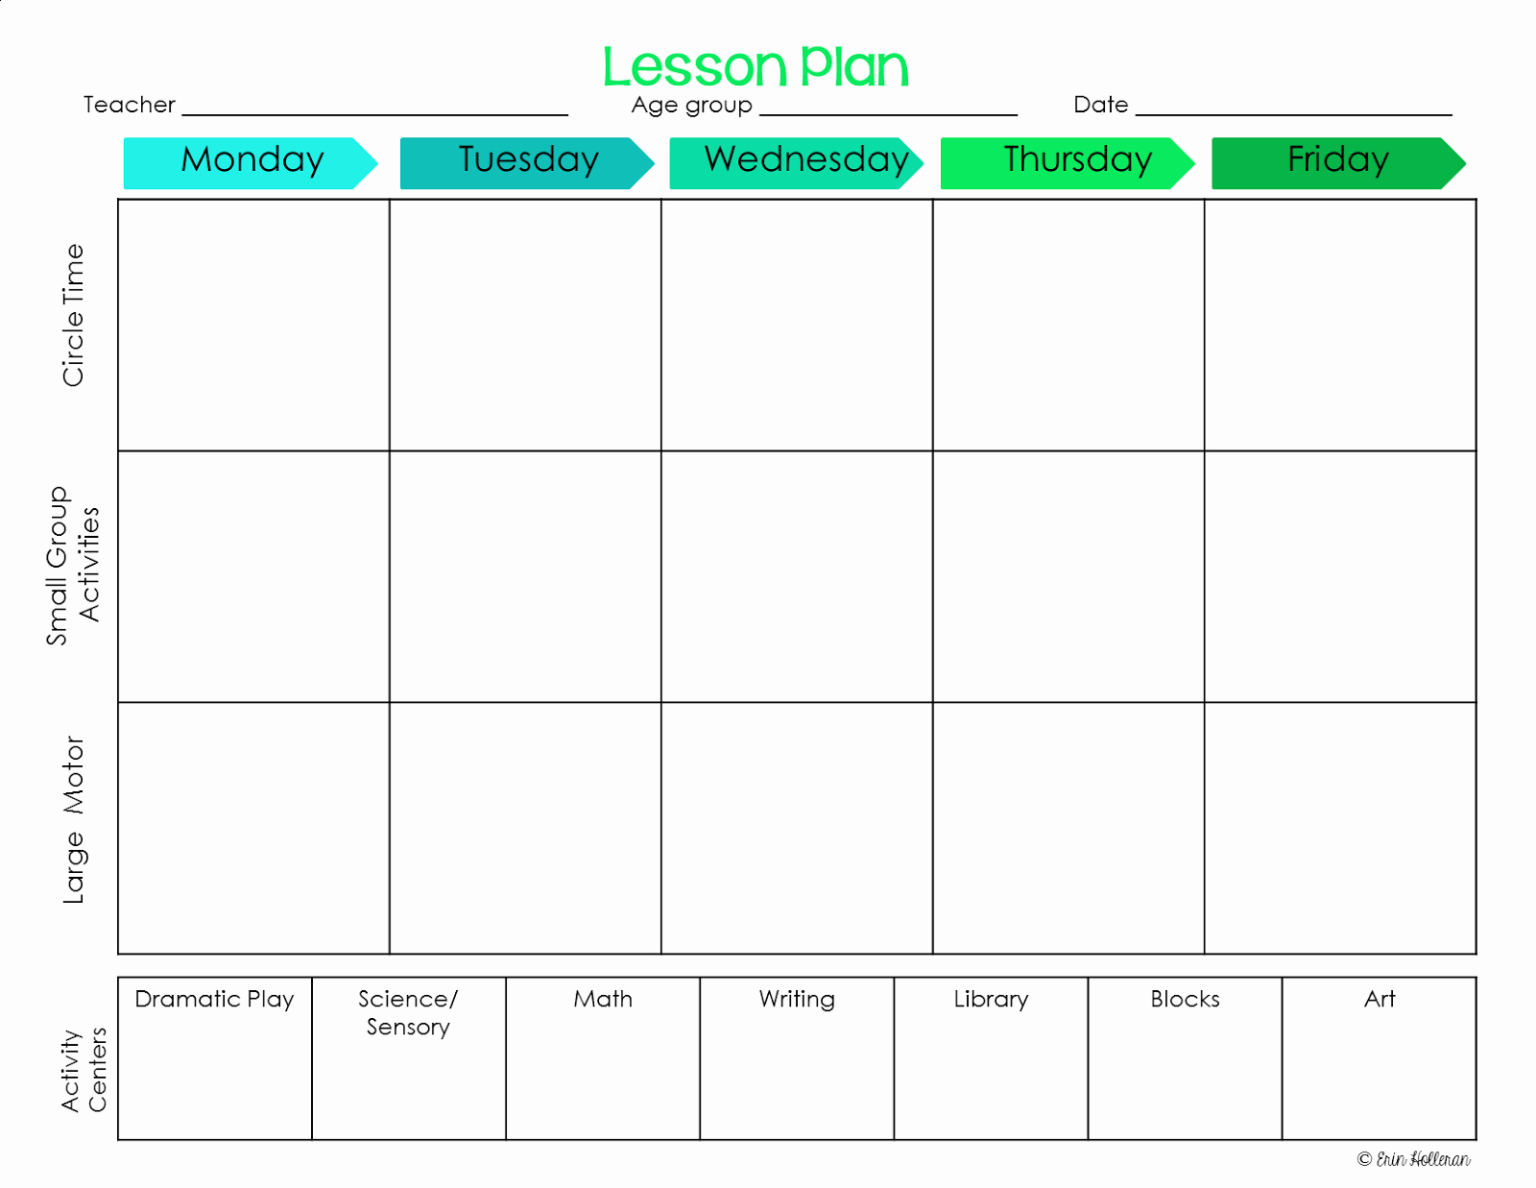 free-printable-blank-lesson-plan-template-resume-gallery